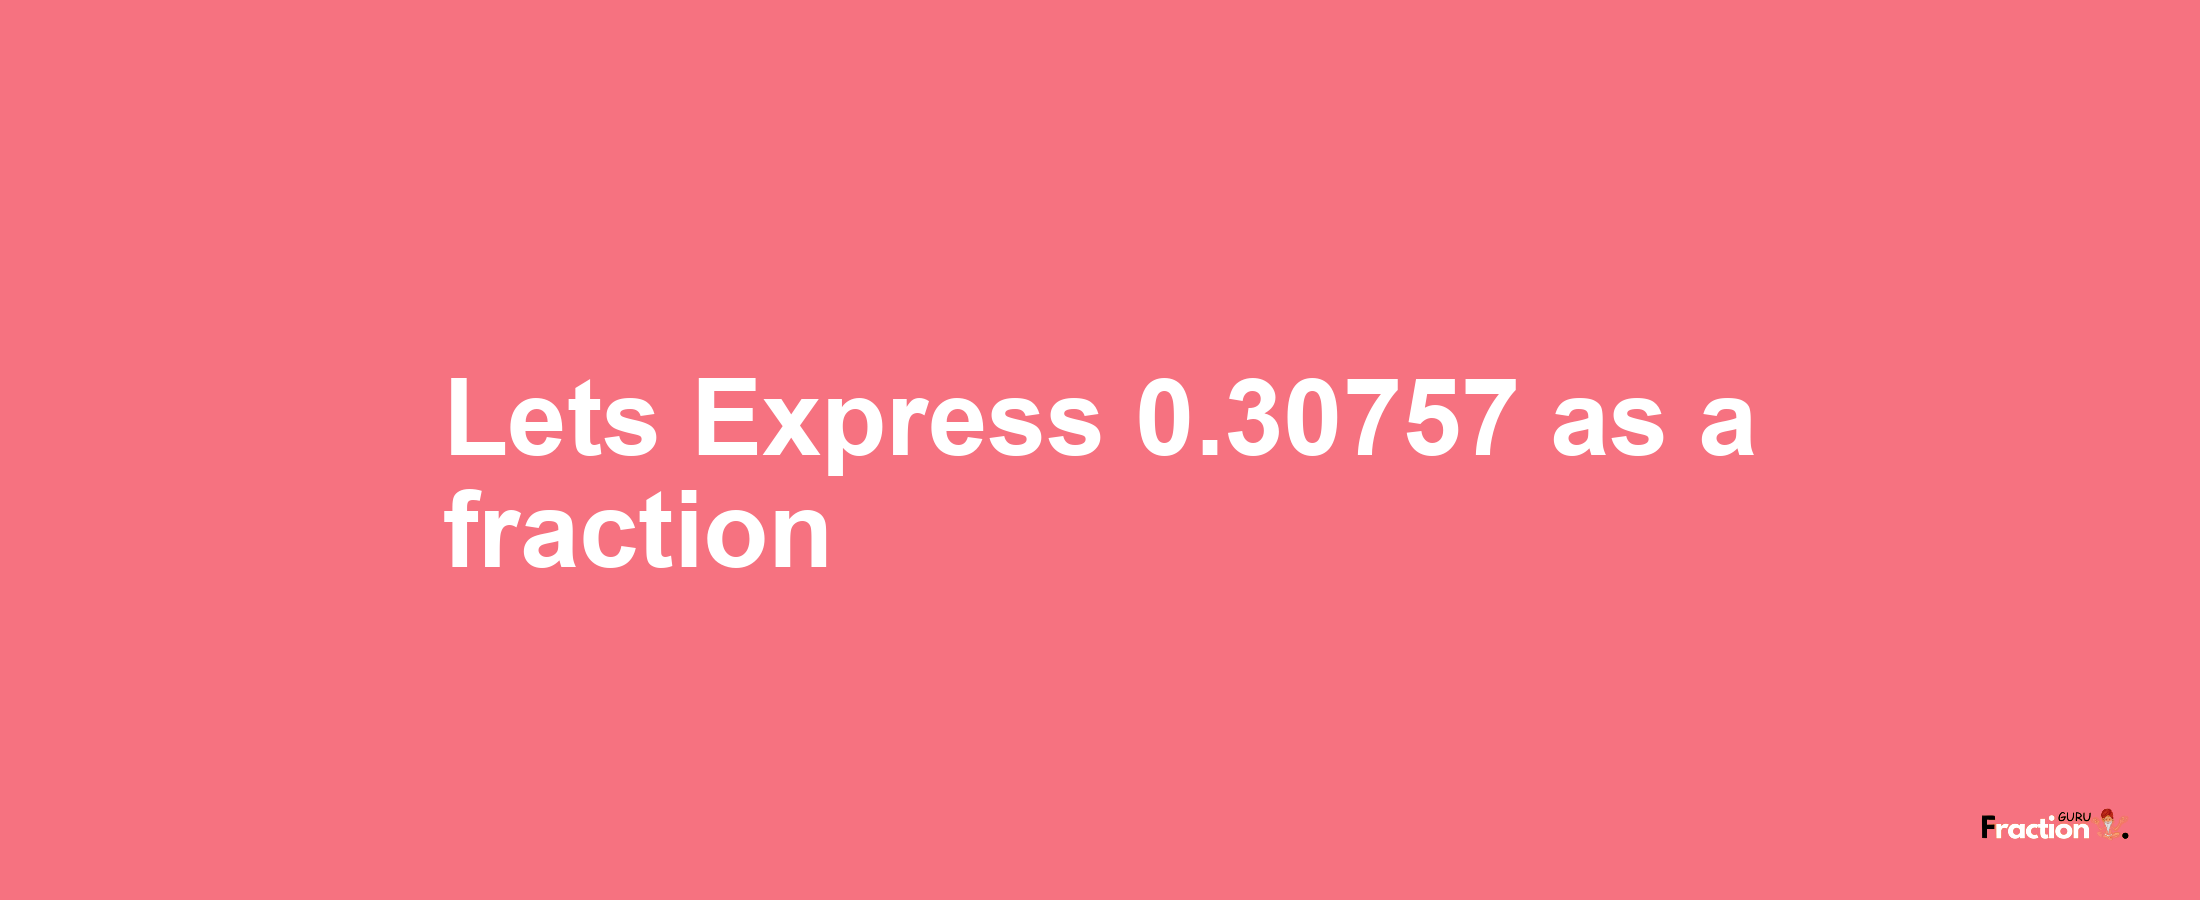 Lets Express 0.30757 as afraction